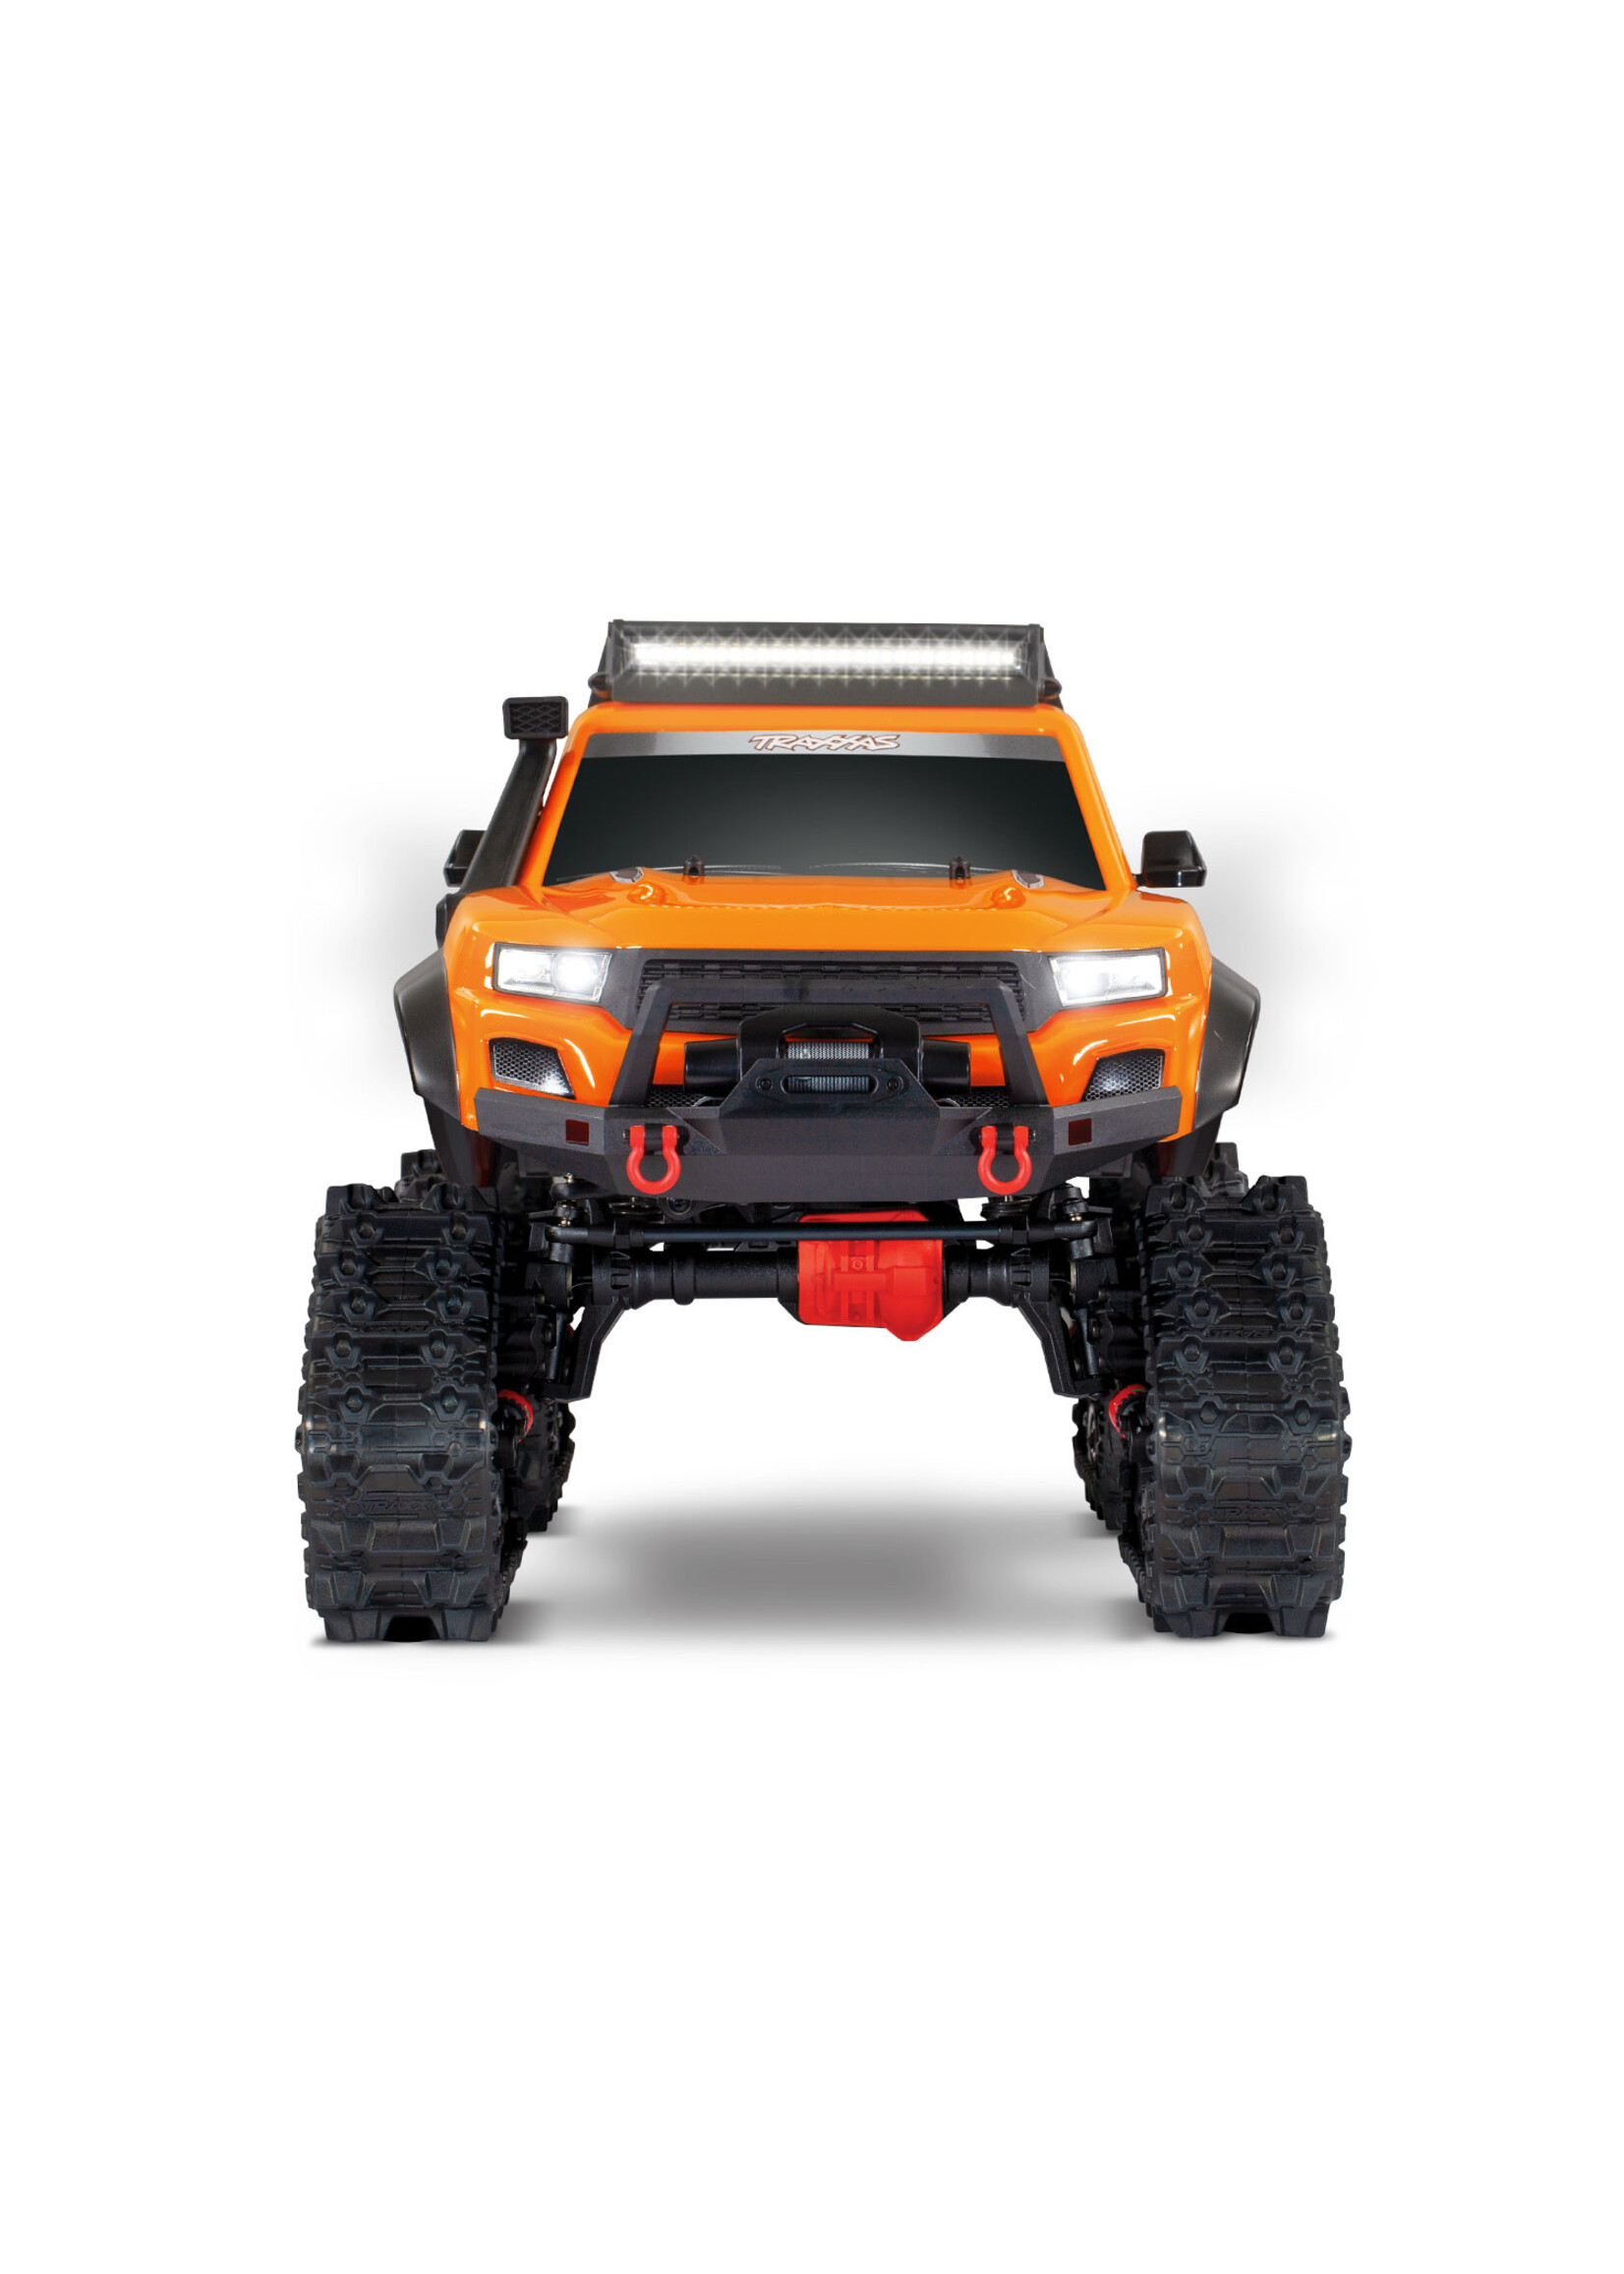 Traxxas 822344ORNG - TRX-4 Scale & Trail Crawler With Clipless Body & Deep Terrain Tires - Orange